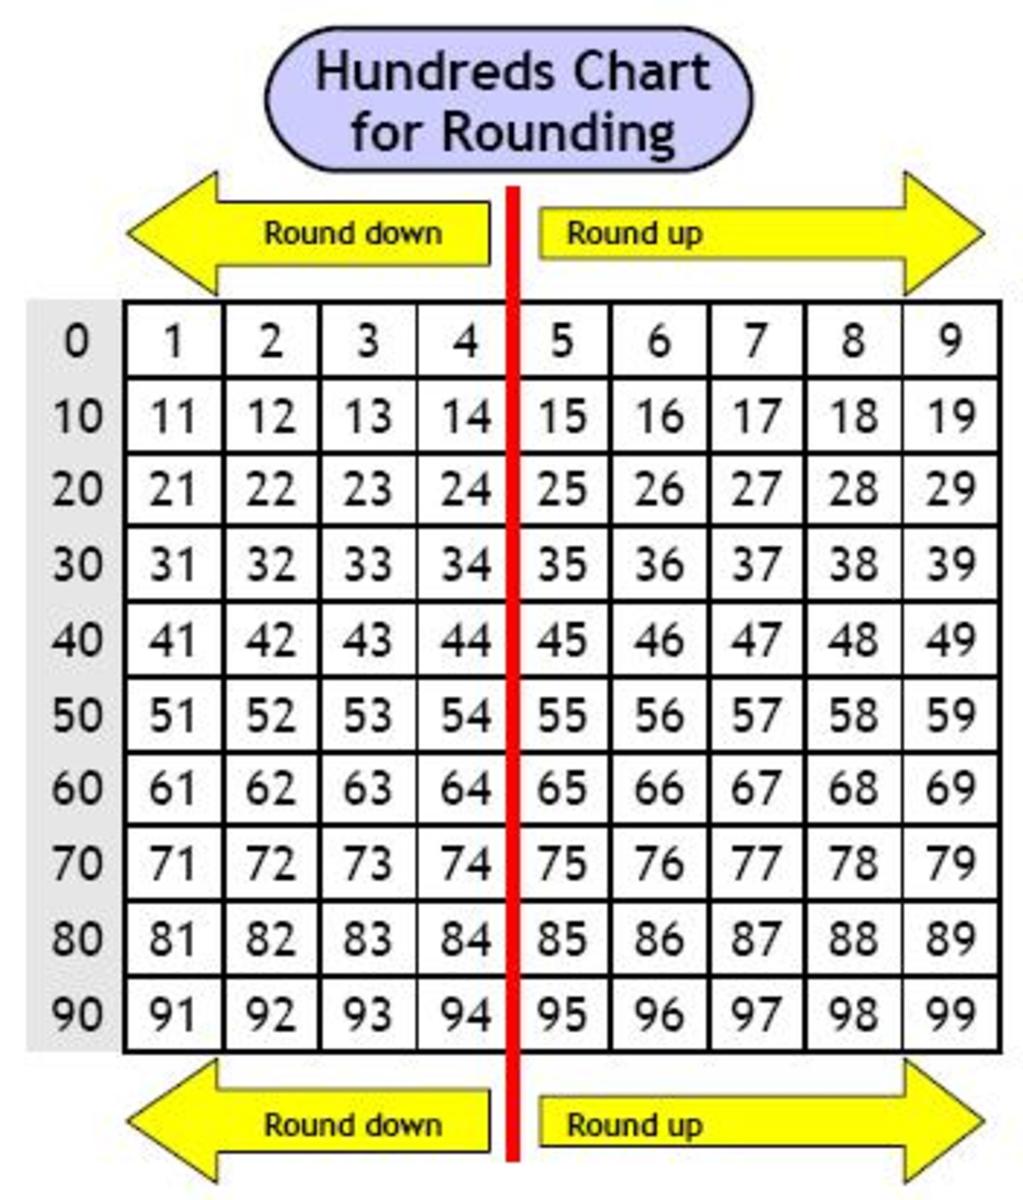 maths-help-how-to-round-a-number-to-the-nearest-10-100-or-1000-simple-rule-you-can-use-for-rounding-to-any-number